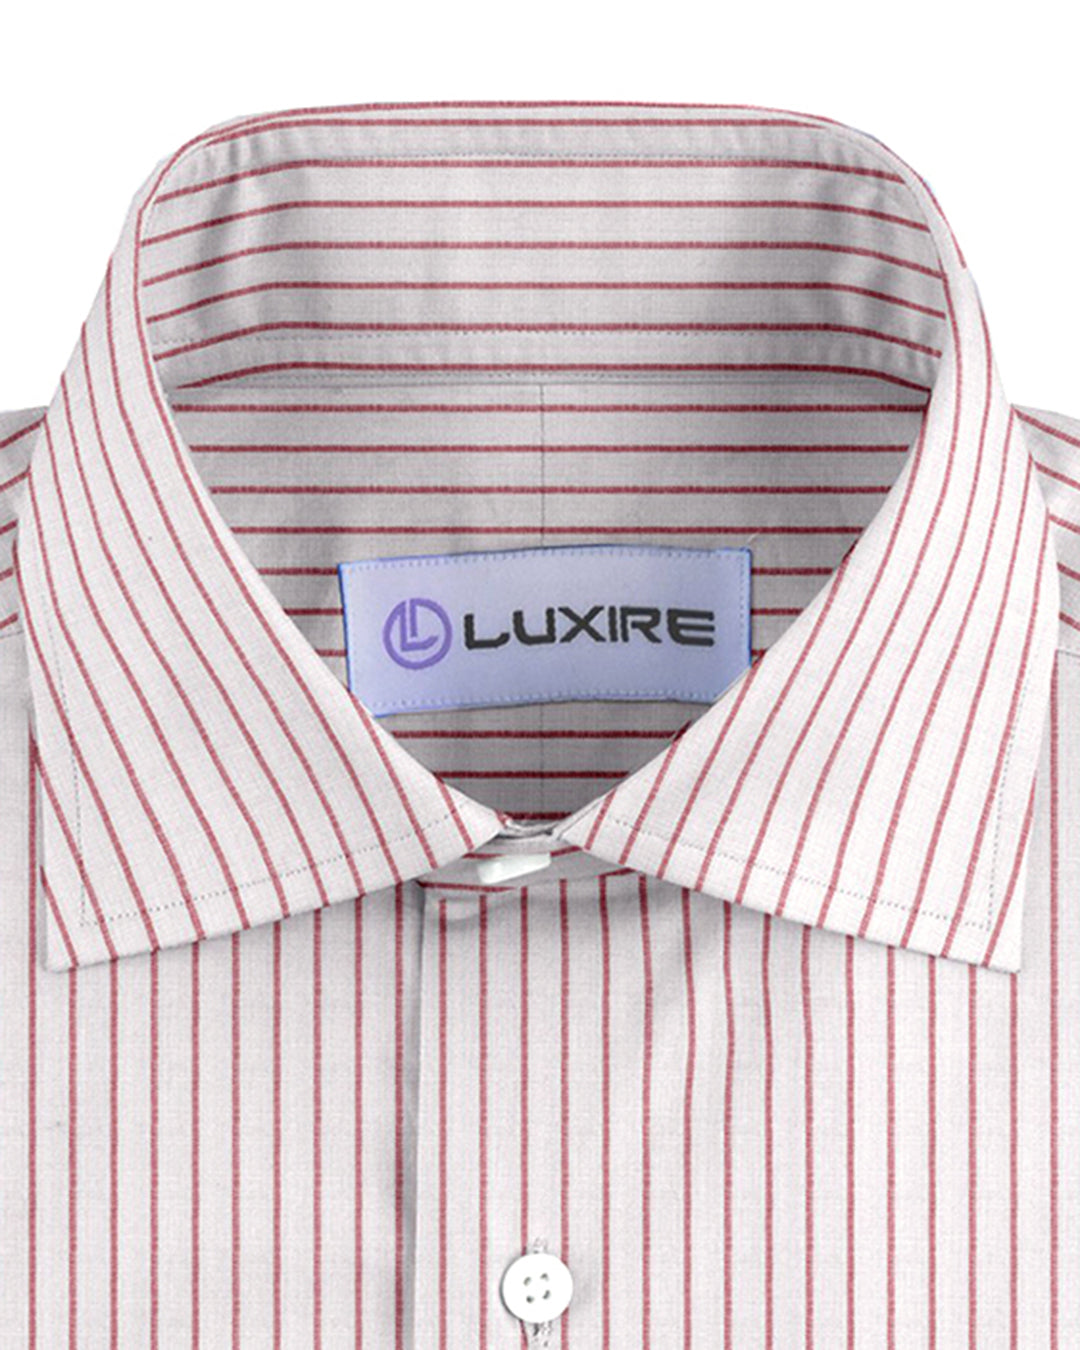 Collar of the custom linen shirt for men in white and red pinstripes by Luxire Clothing